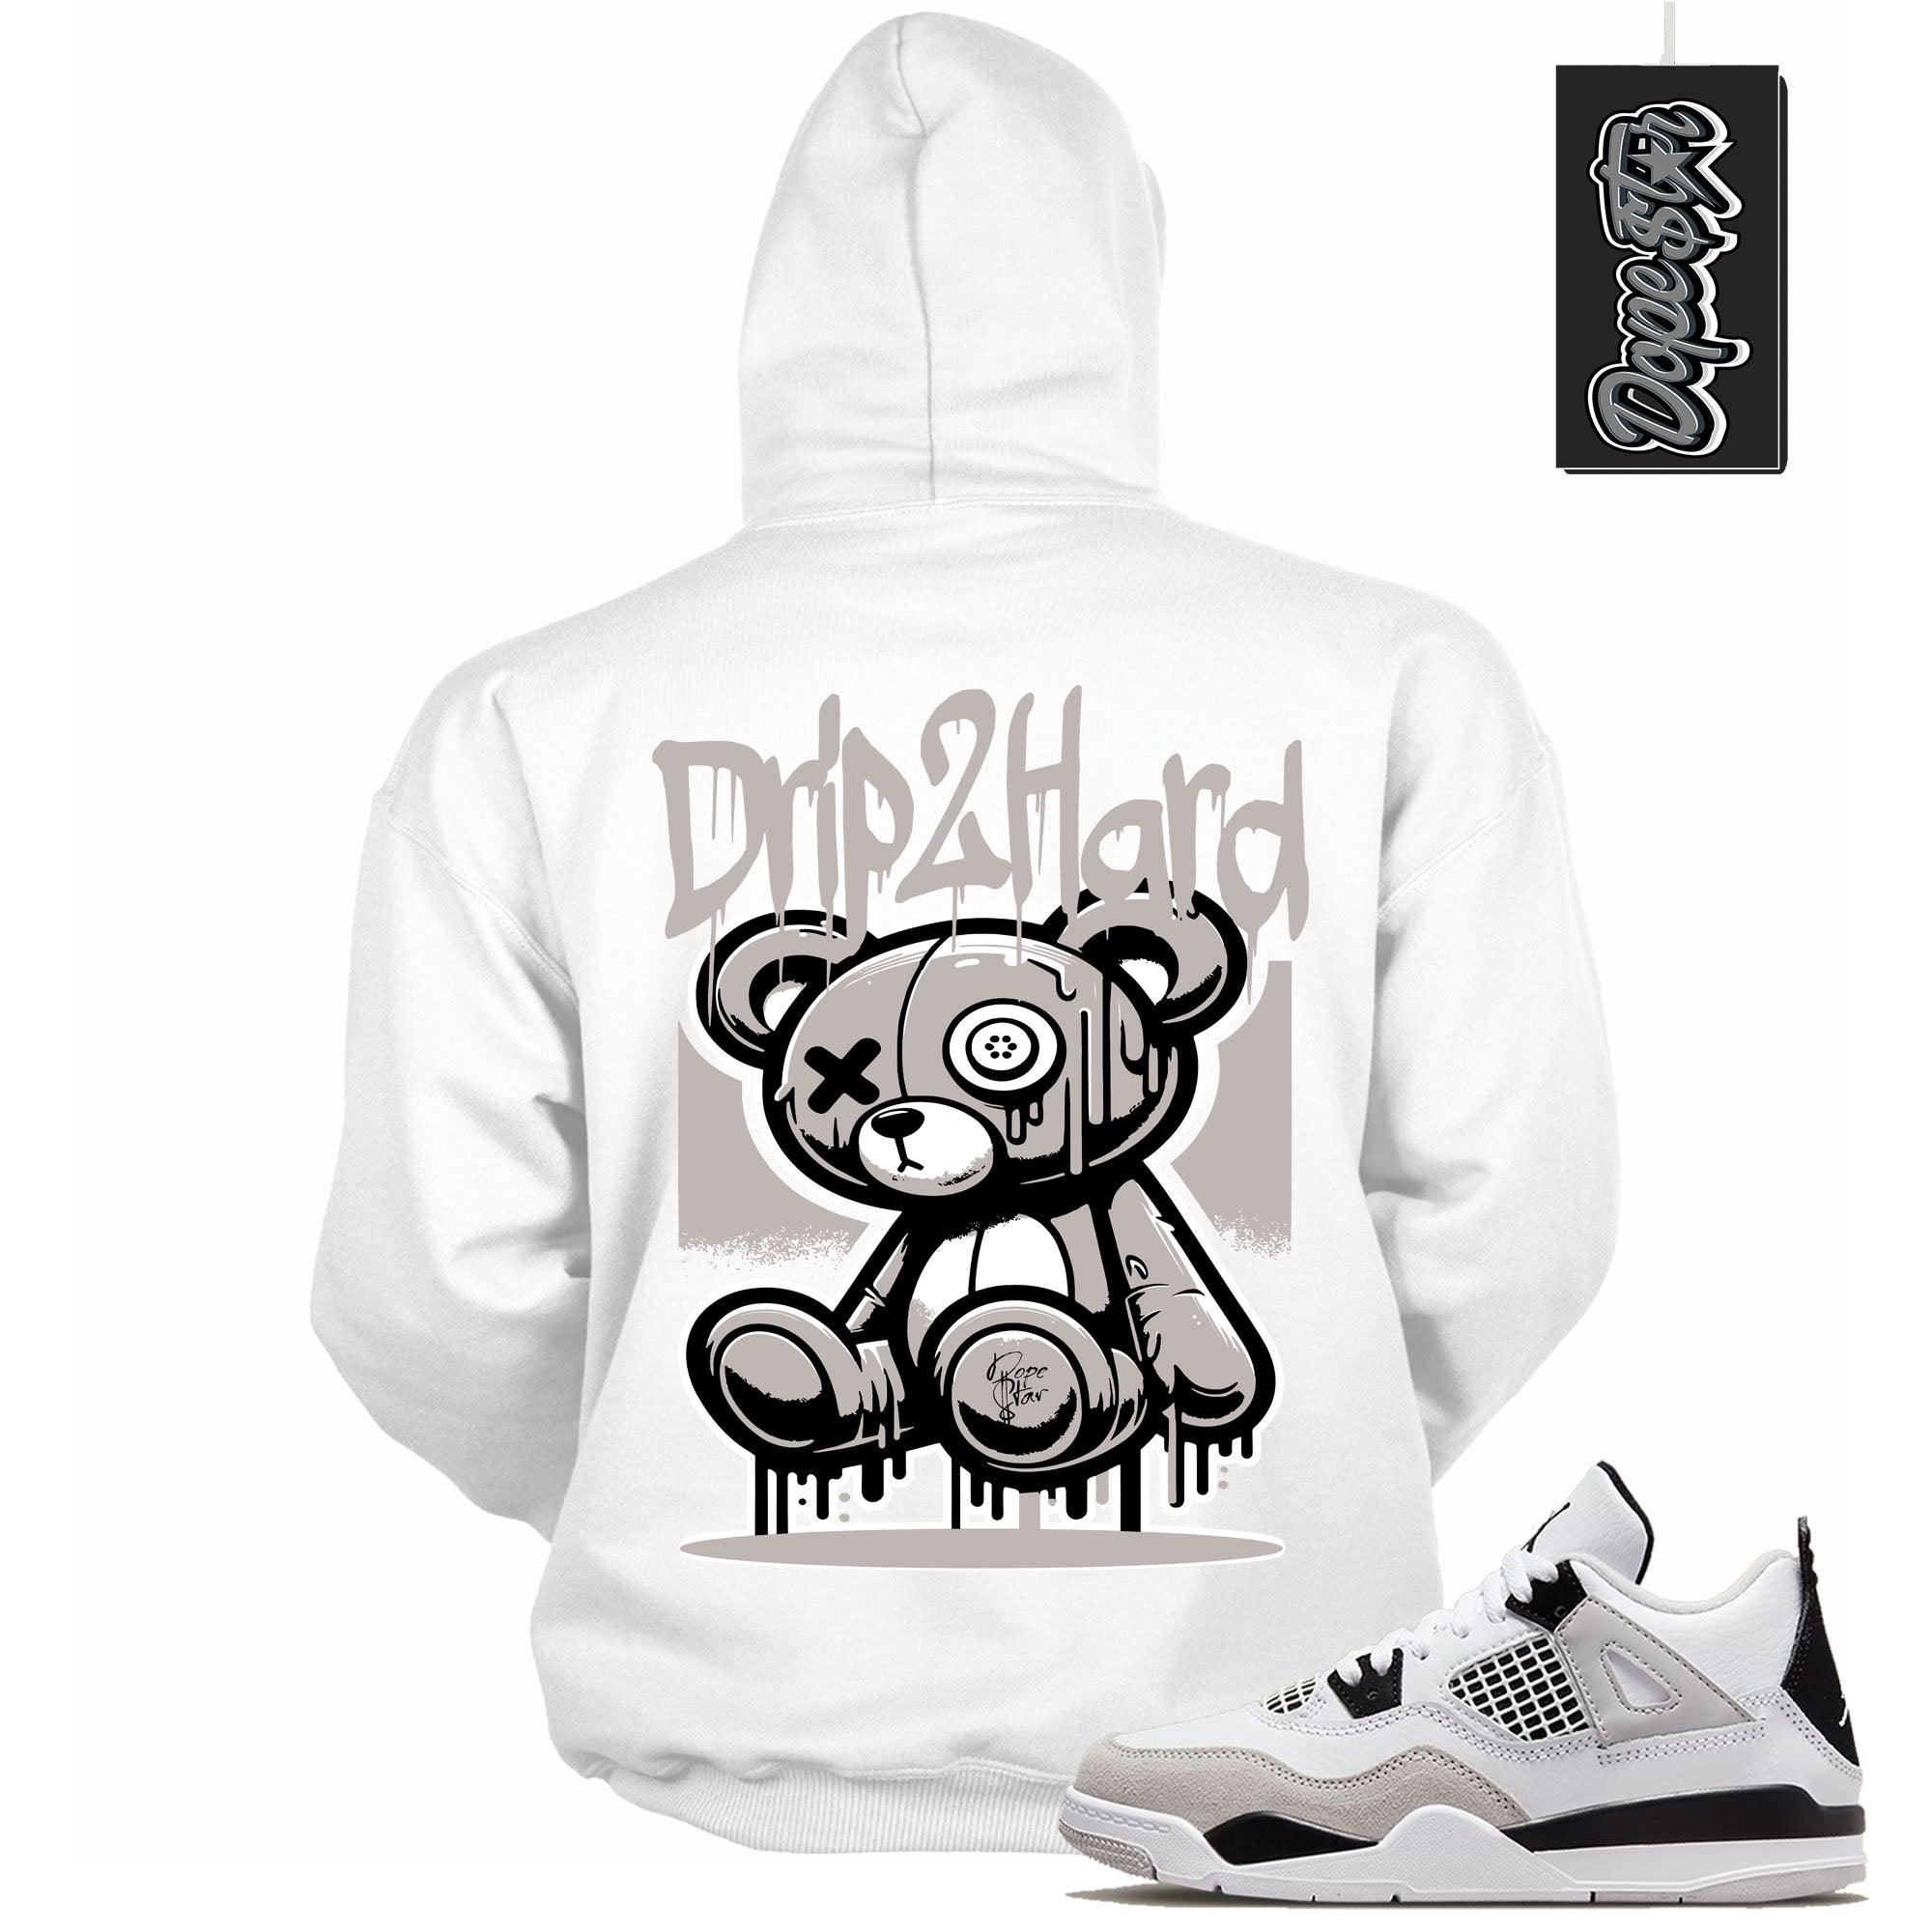 Cool White Hoodie With Drip To Hard design That Perfectly Matches AIR JORDAN 4 RETRO MILITARY BLACK Sneakers.